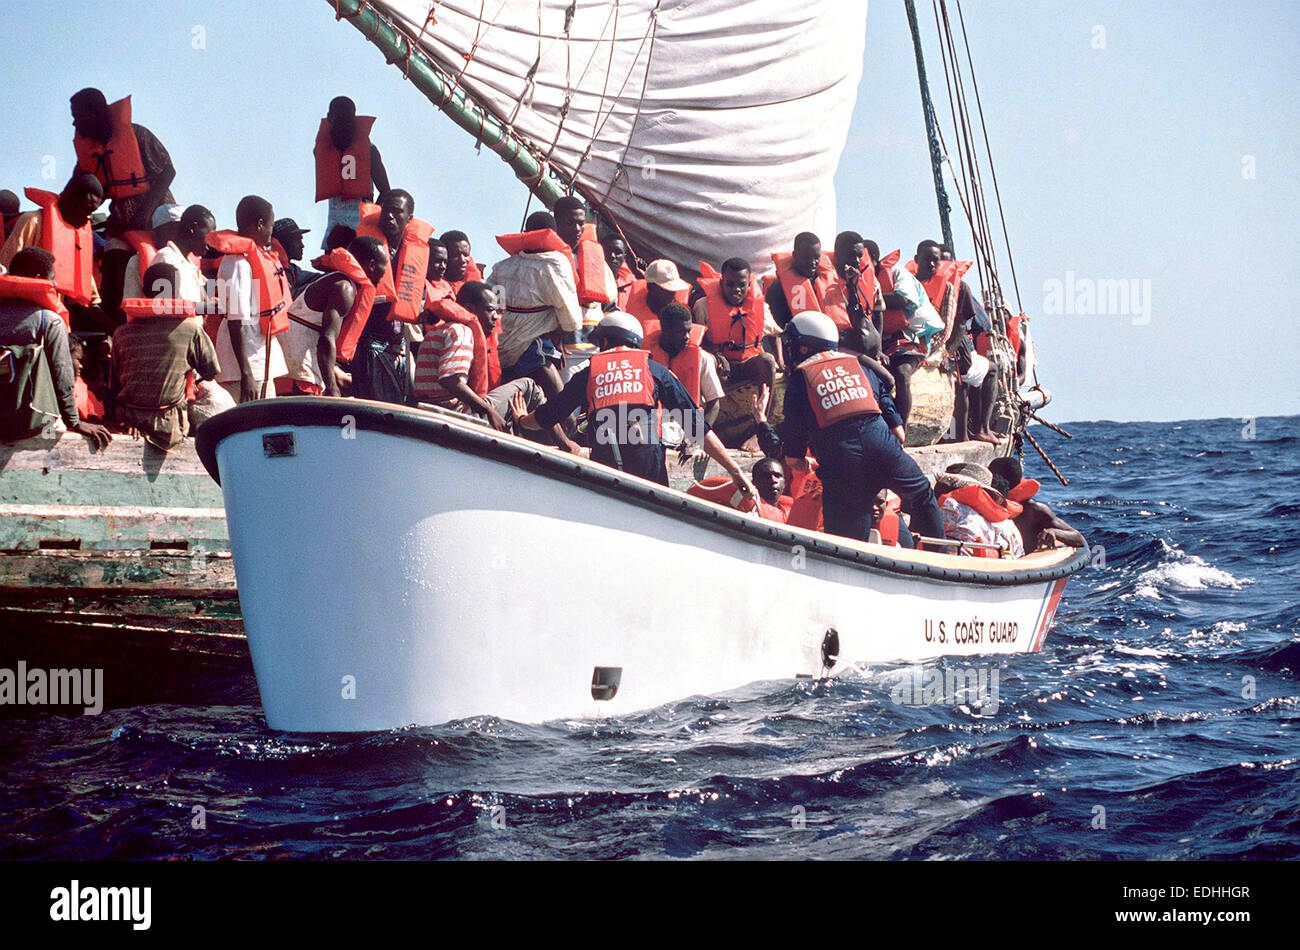 Haitian migrants scramble to get off a makeshift raft into a U.S. Coast Guard lifeboat after being interdicted at sea on their way to Florida November 10, 1991 in the Caribbean Sea. The refugees will be taken to camps in Guantanamo Bay, Cuba for repatriation. Stock Photo